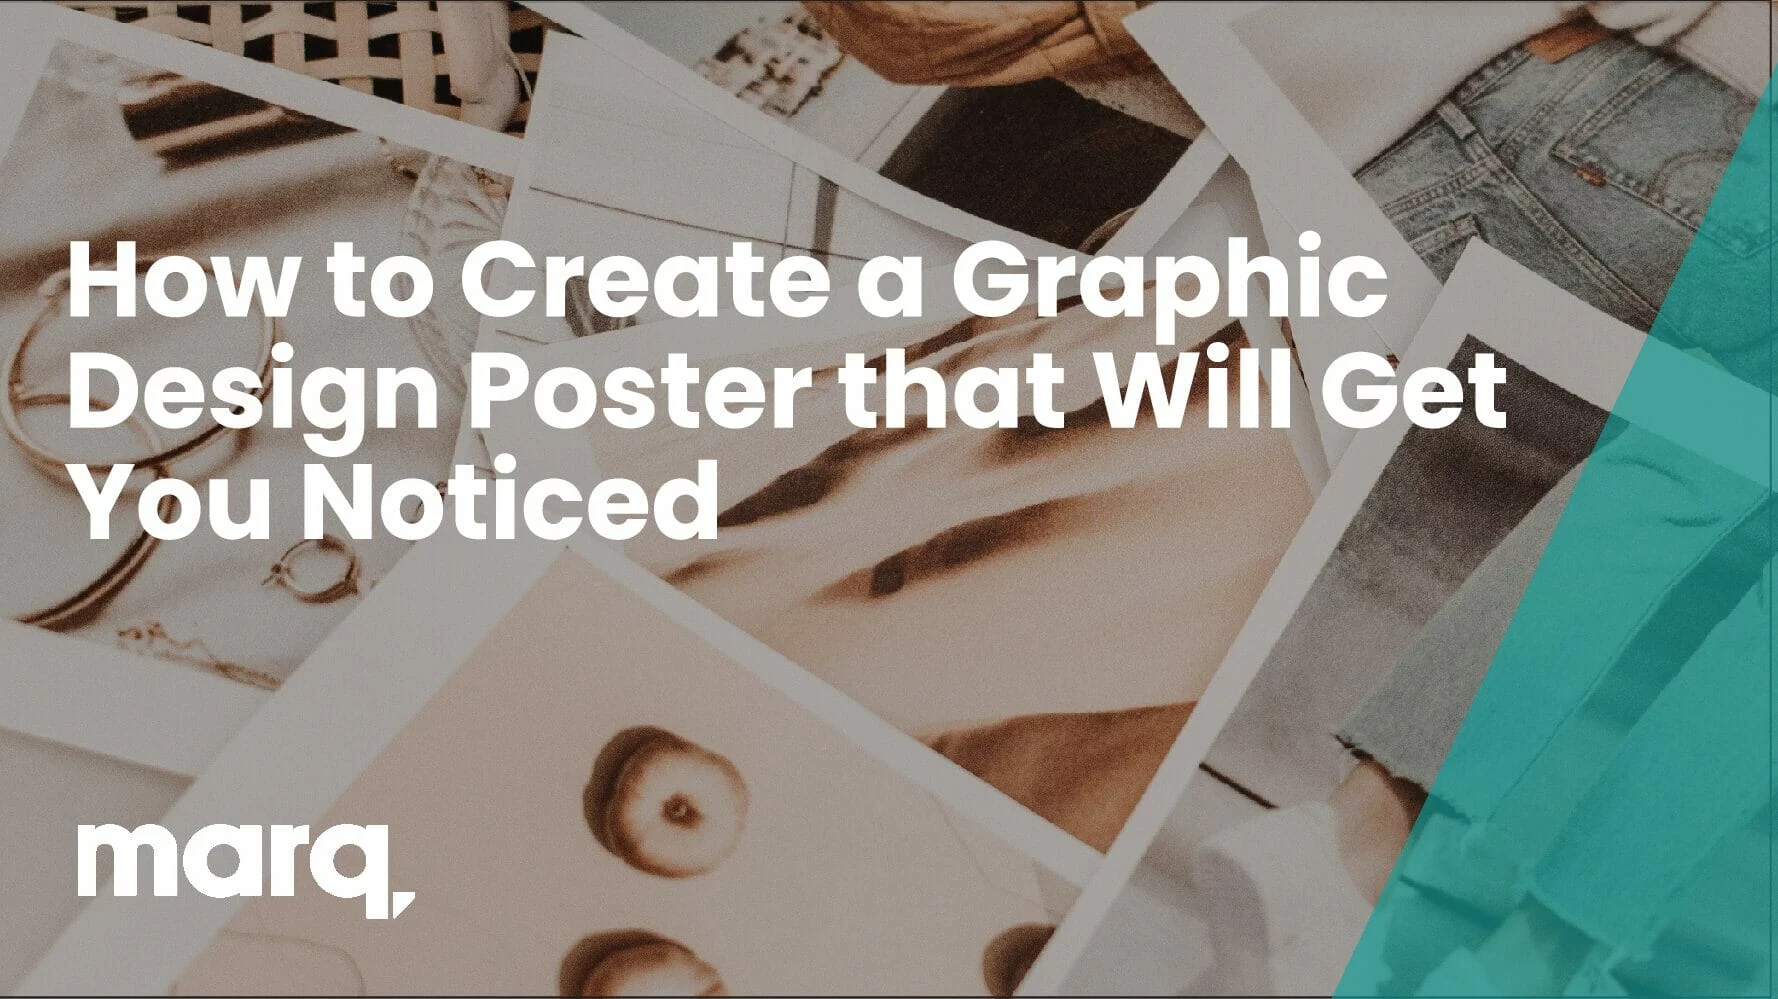 How to Create a Graphic Design Poster that Will Get You Noticed